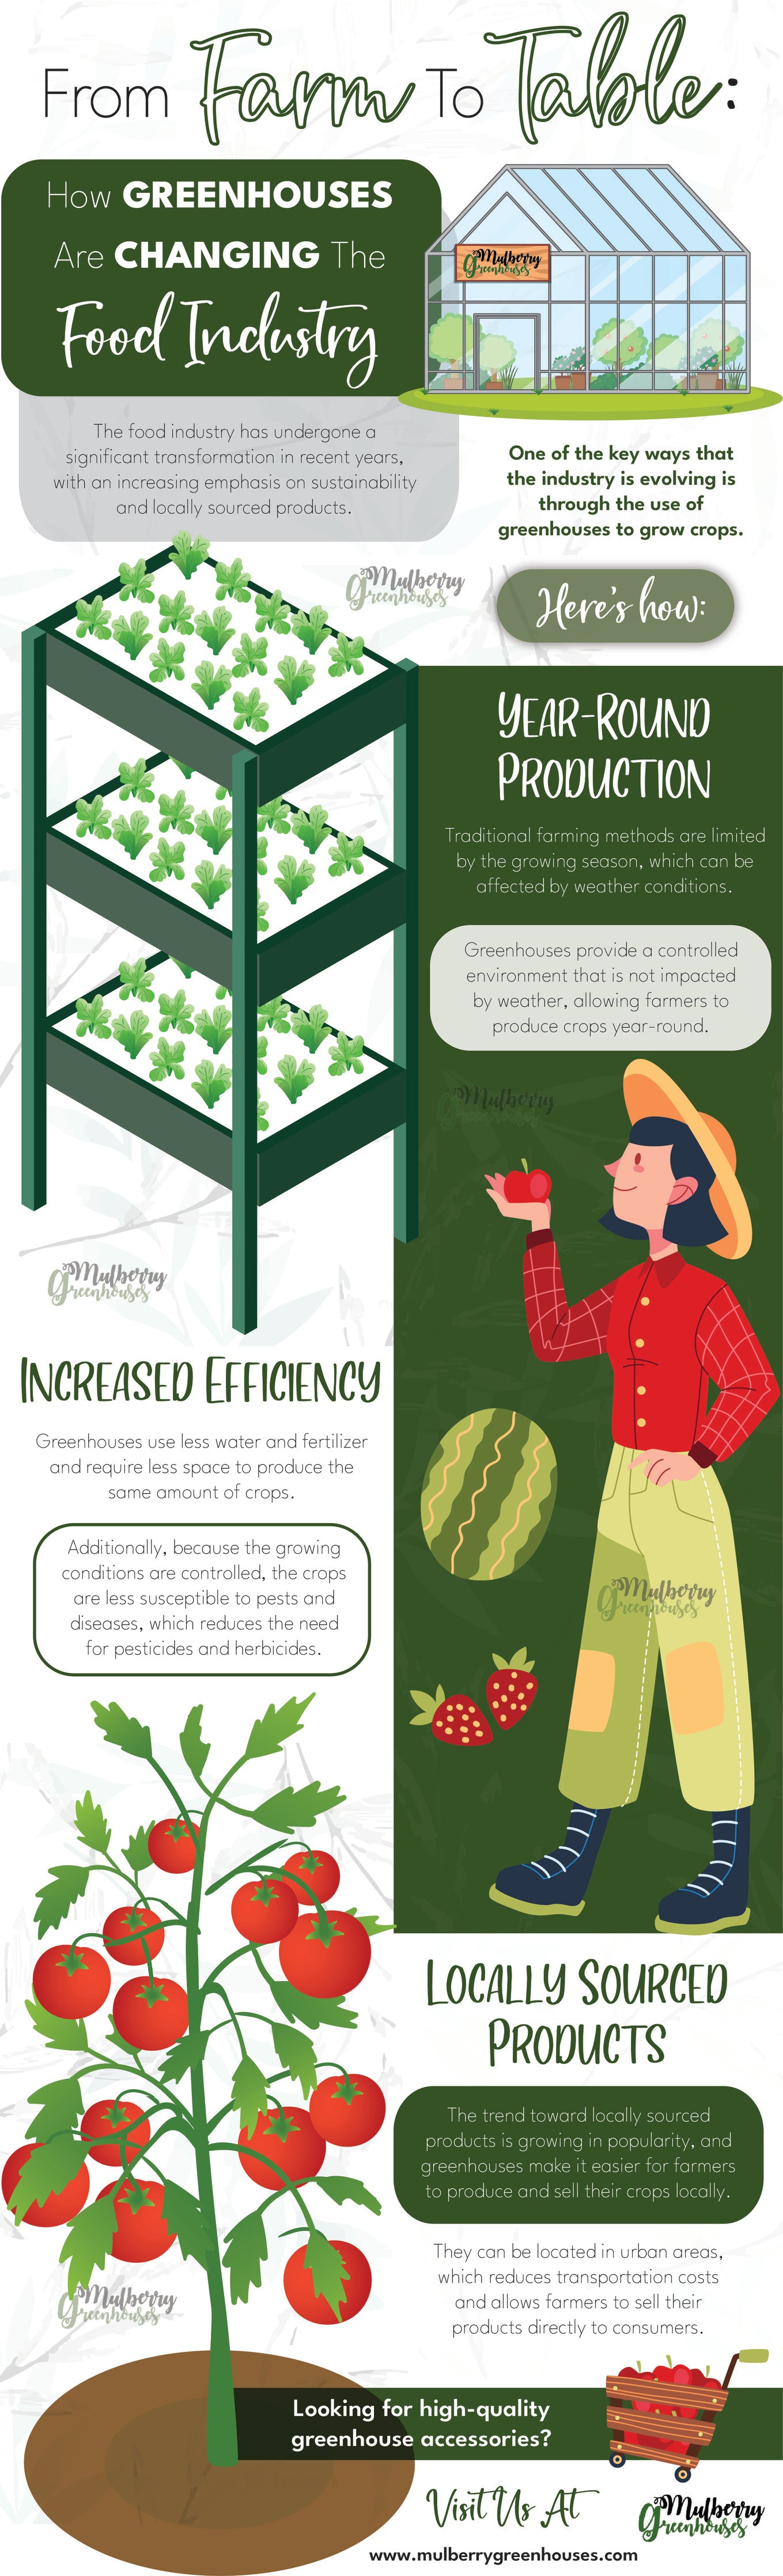 From Farm to Table: How Greenhouses are Changing the Food Industry - Infograph